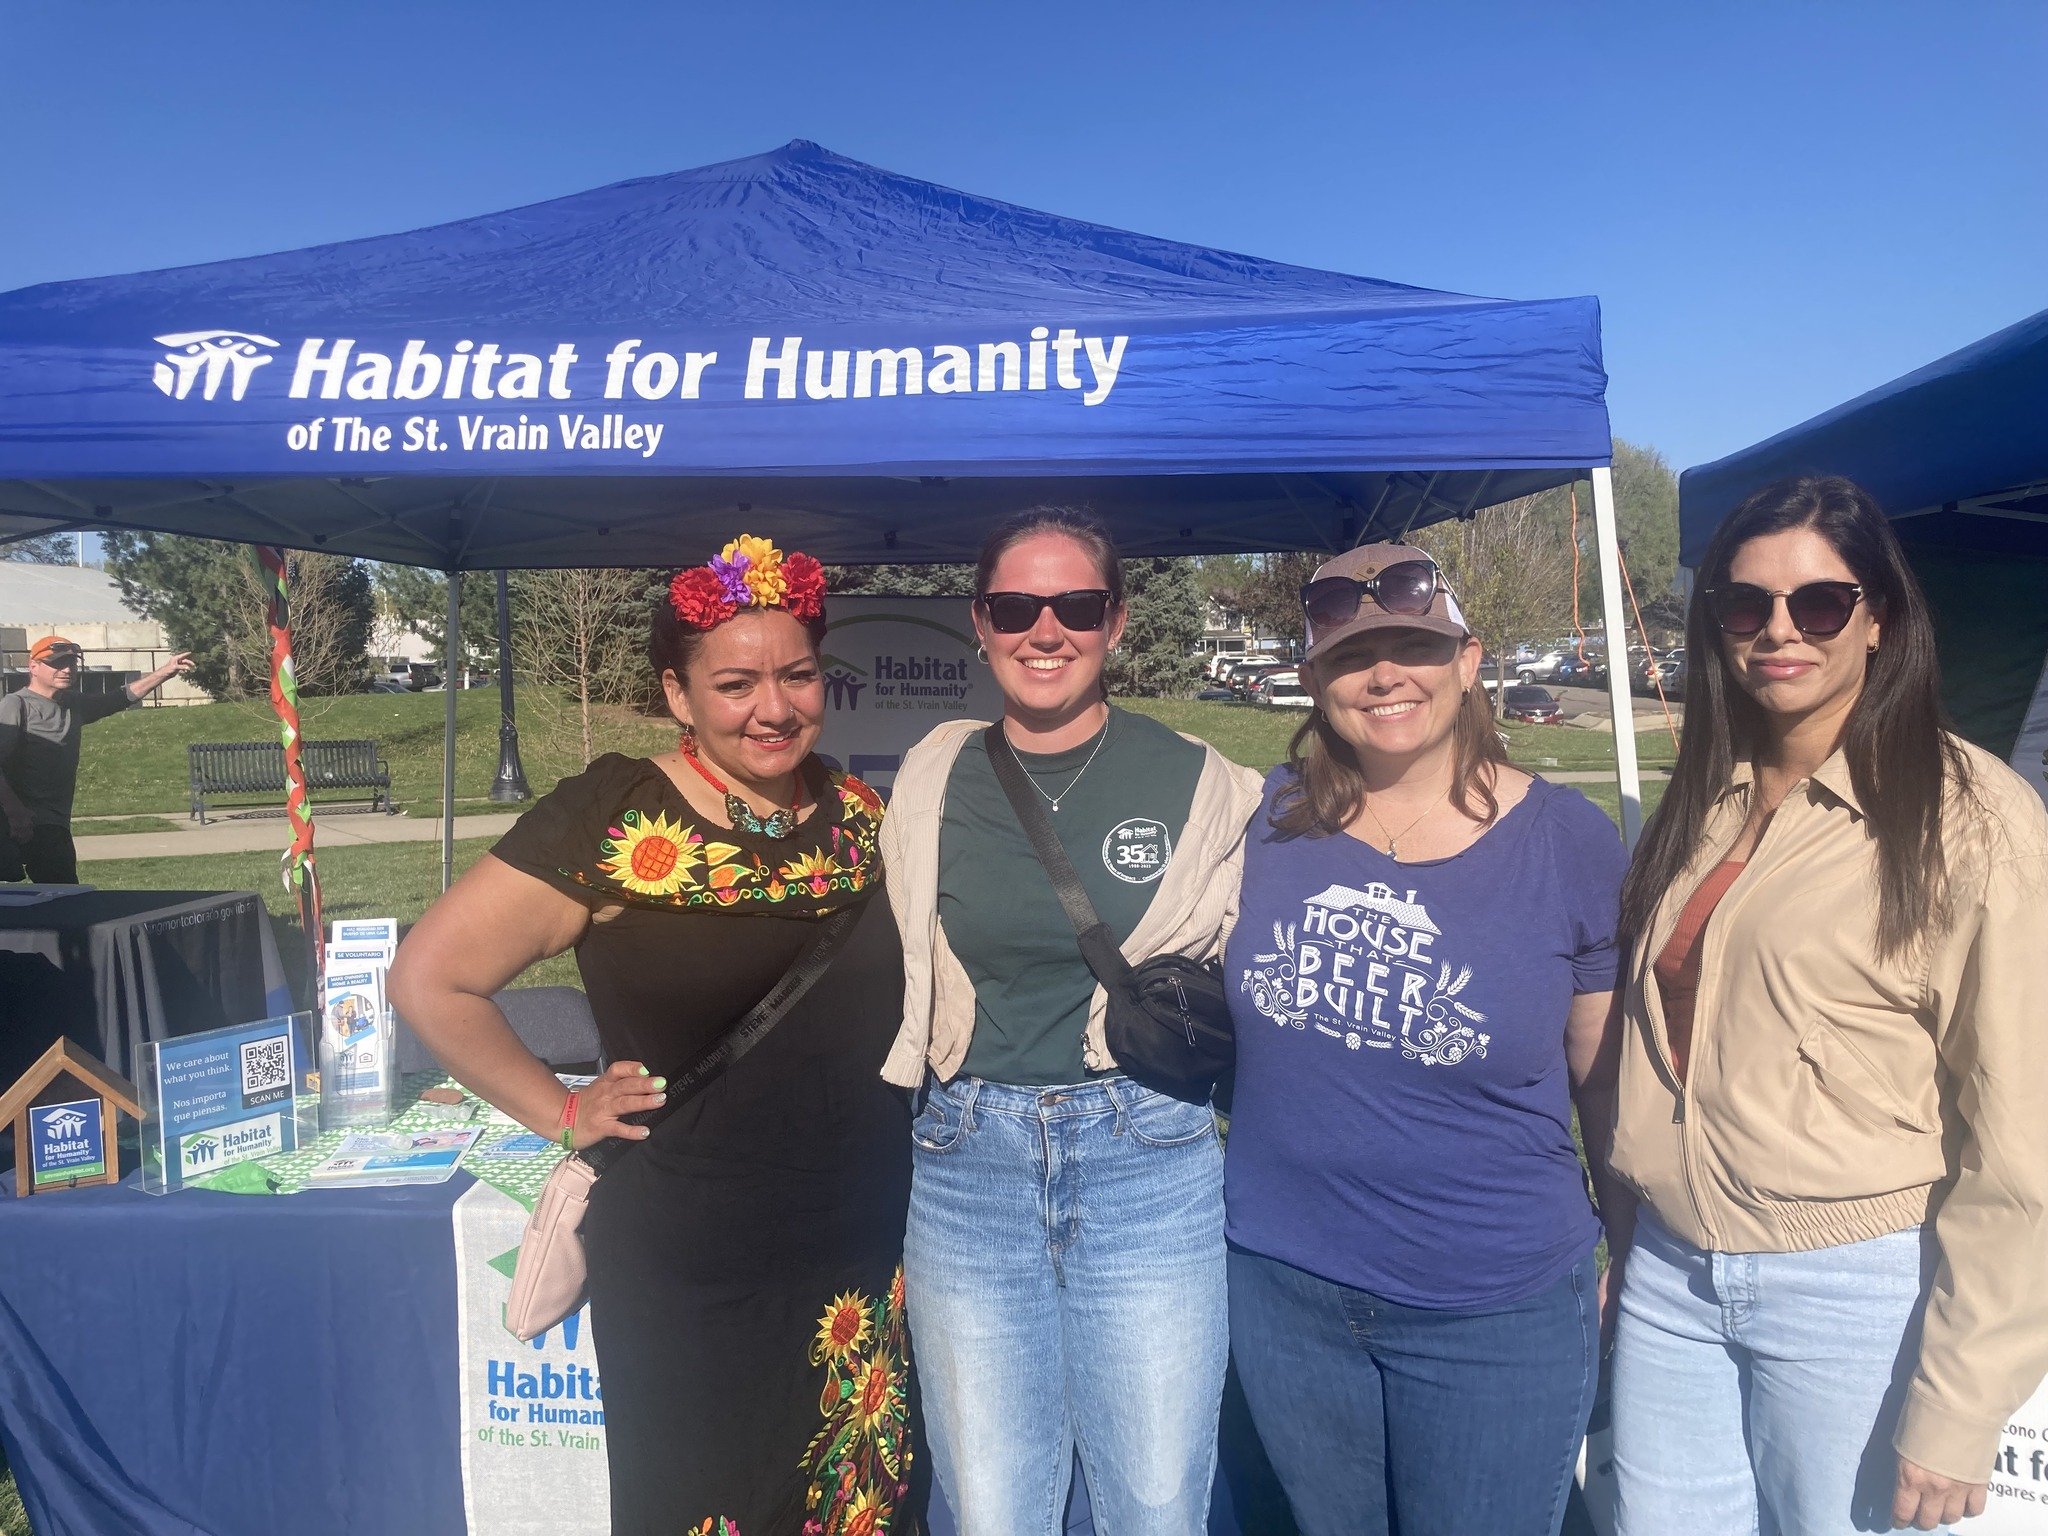 St. Vrain Habitat Homeowners, Staff and Volunteers celebrating community and connections at Longmont Celebrates Cinco de Mayo! Thank you to the amazing organizers and everyone who came out!  #CommunityBuilding #HabitatforHumanity #longmontevents #cin